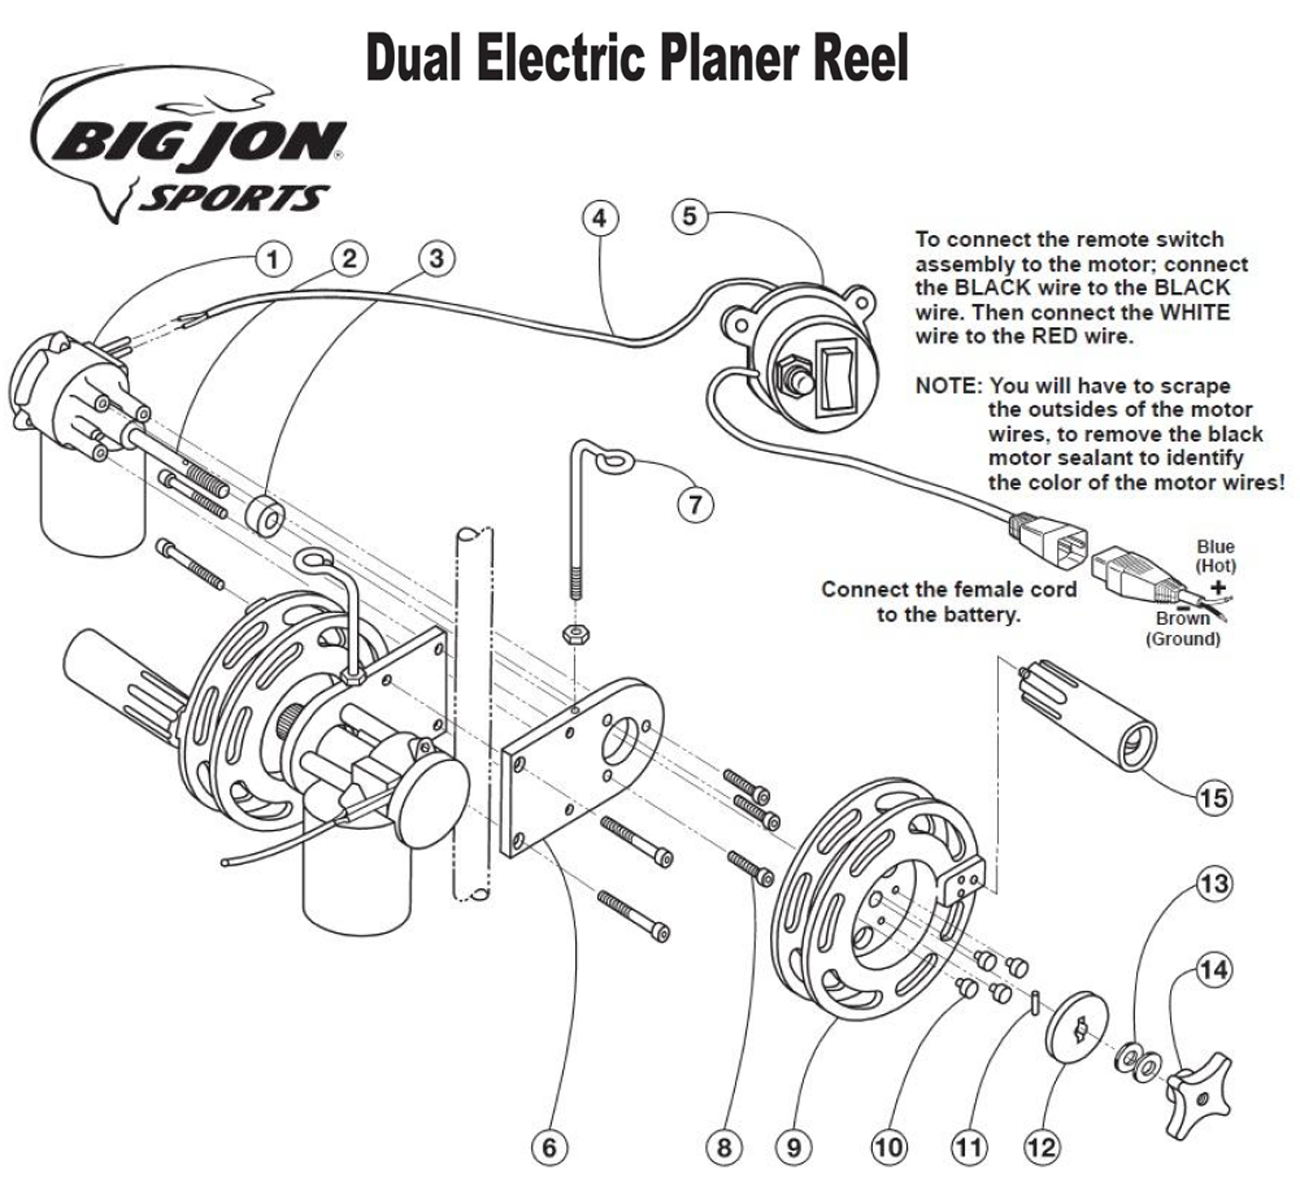 Order Big Jon Dual Electric Planer Reel Parts online from